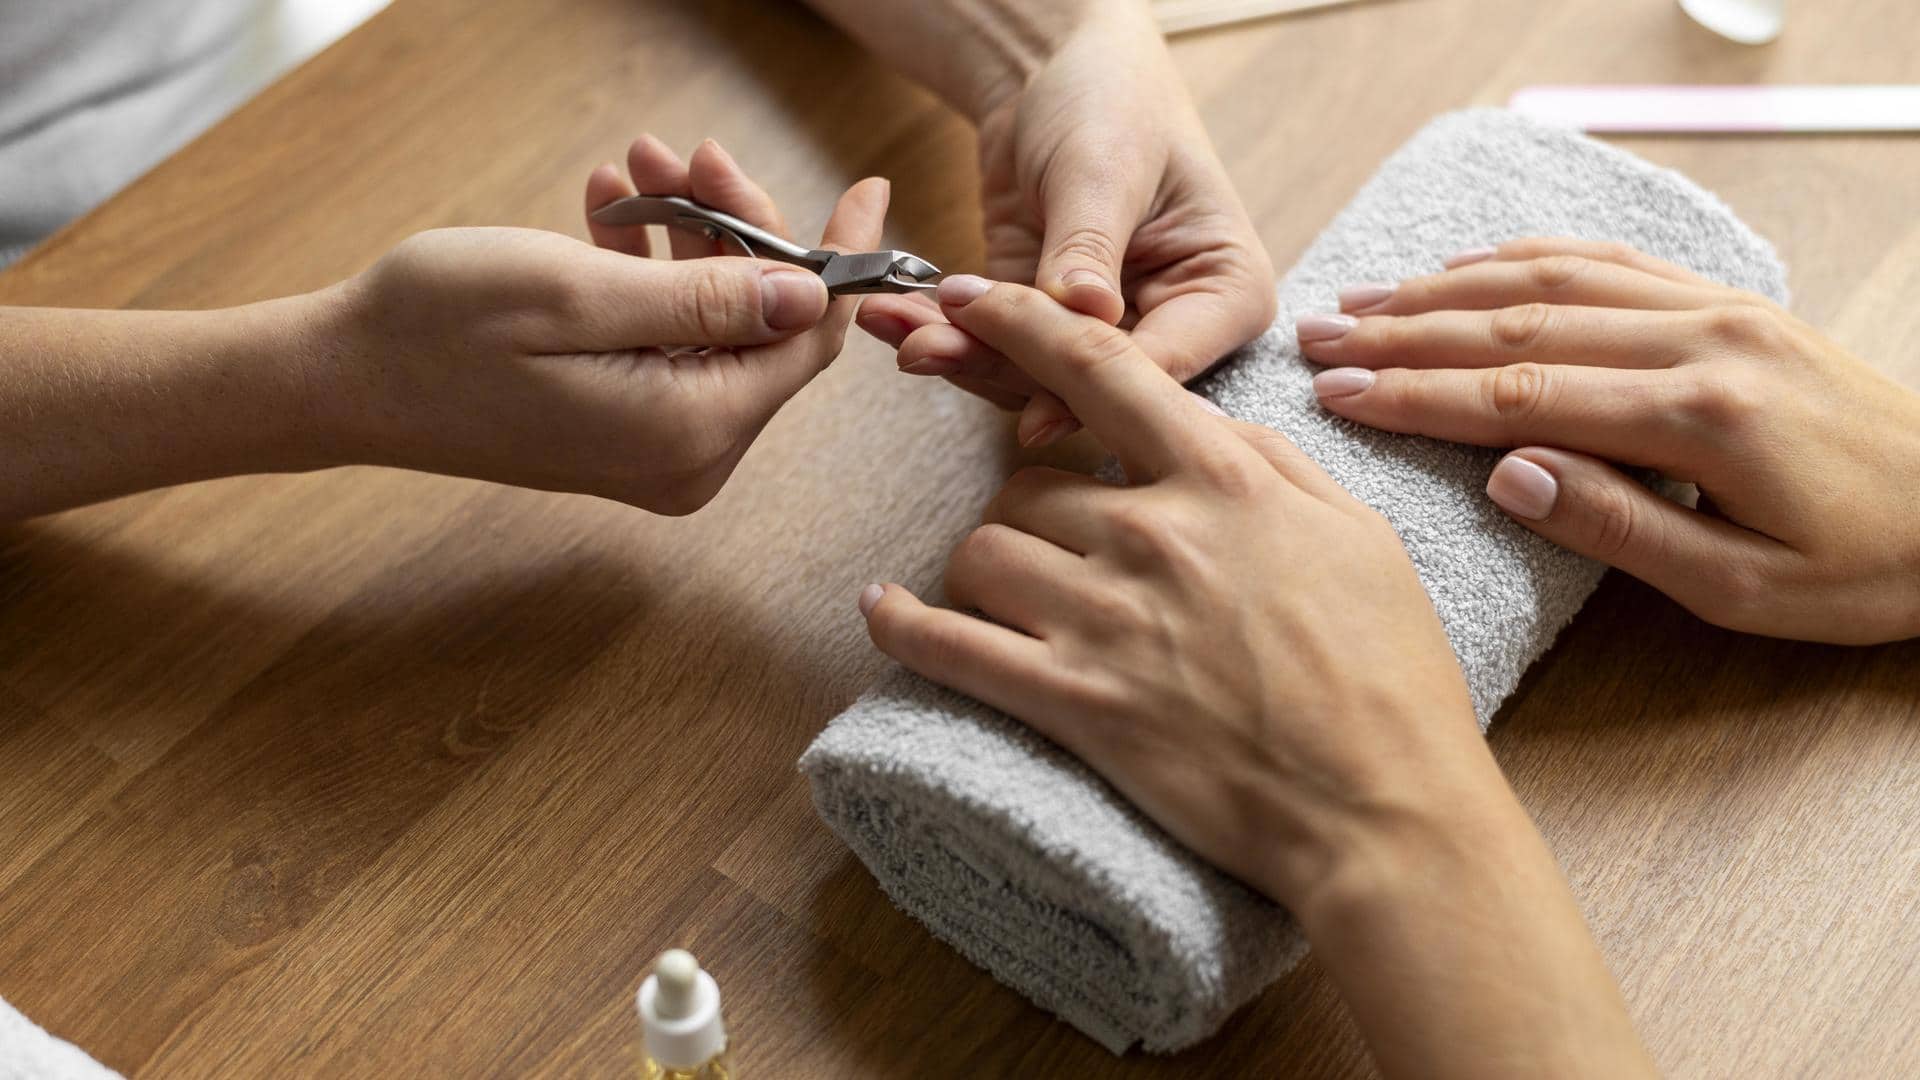 Nail care is more important than you think